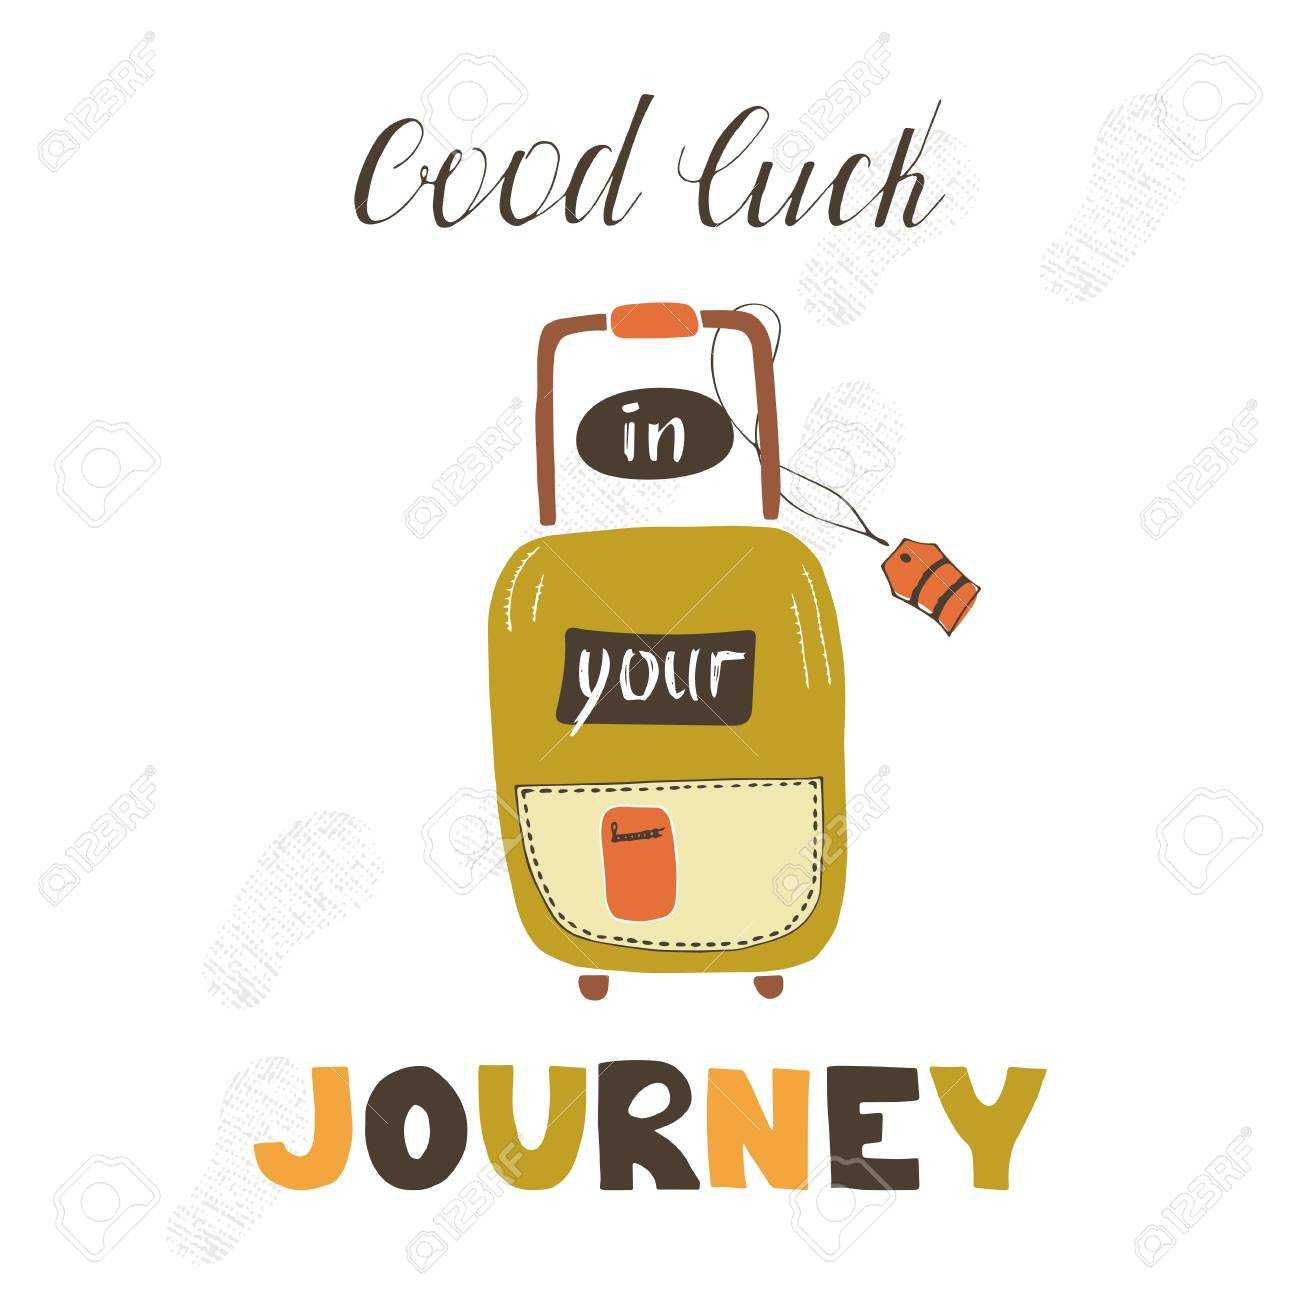 Travel Card Template With Suitcase. Greeting Postcard With Hand.. Throughout Good Luck Banner Template